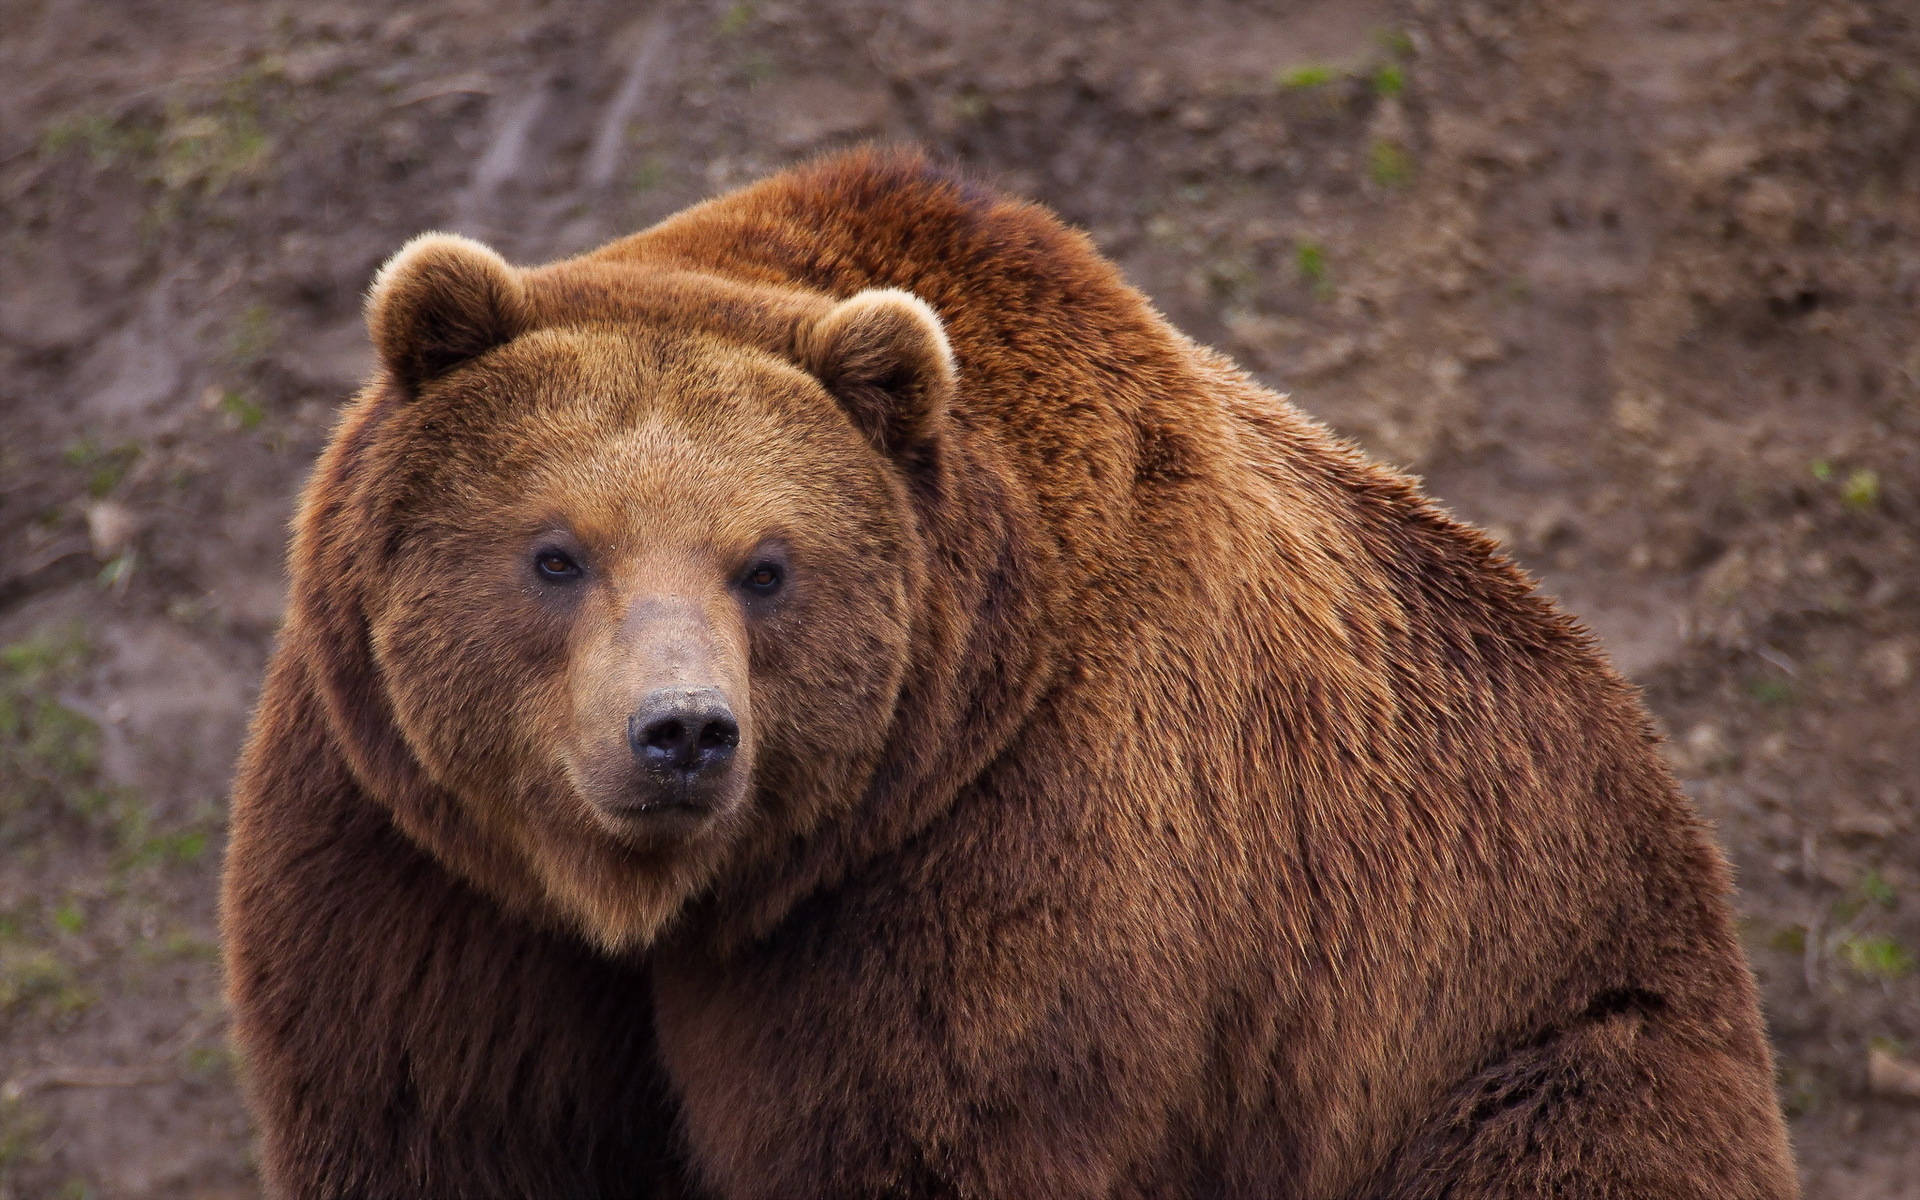 A Sweet and Adorable Brown Bear Wallpaper